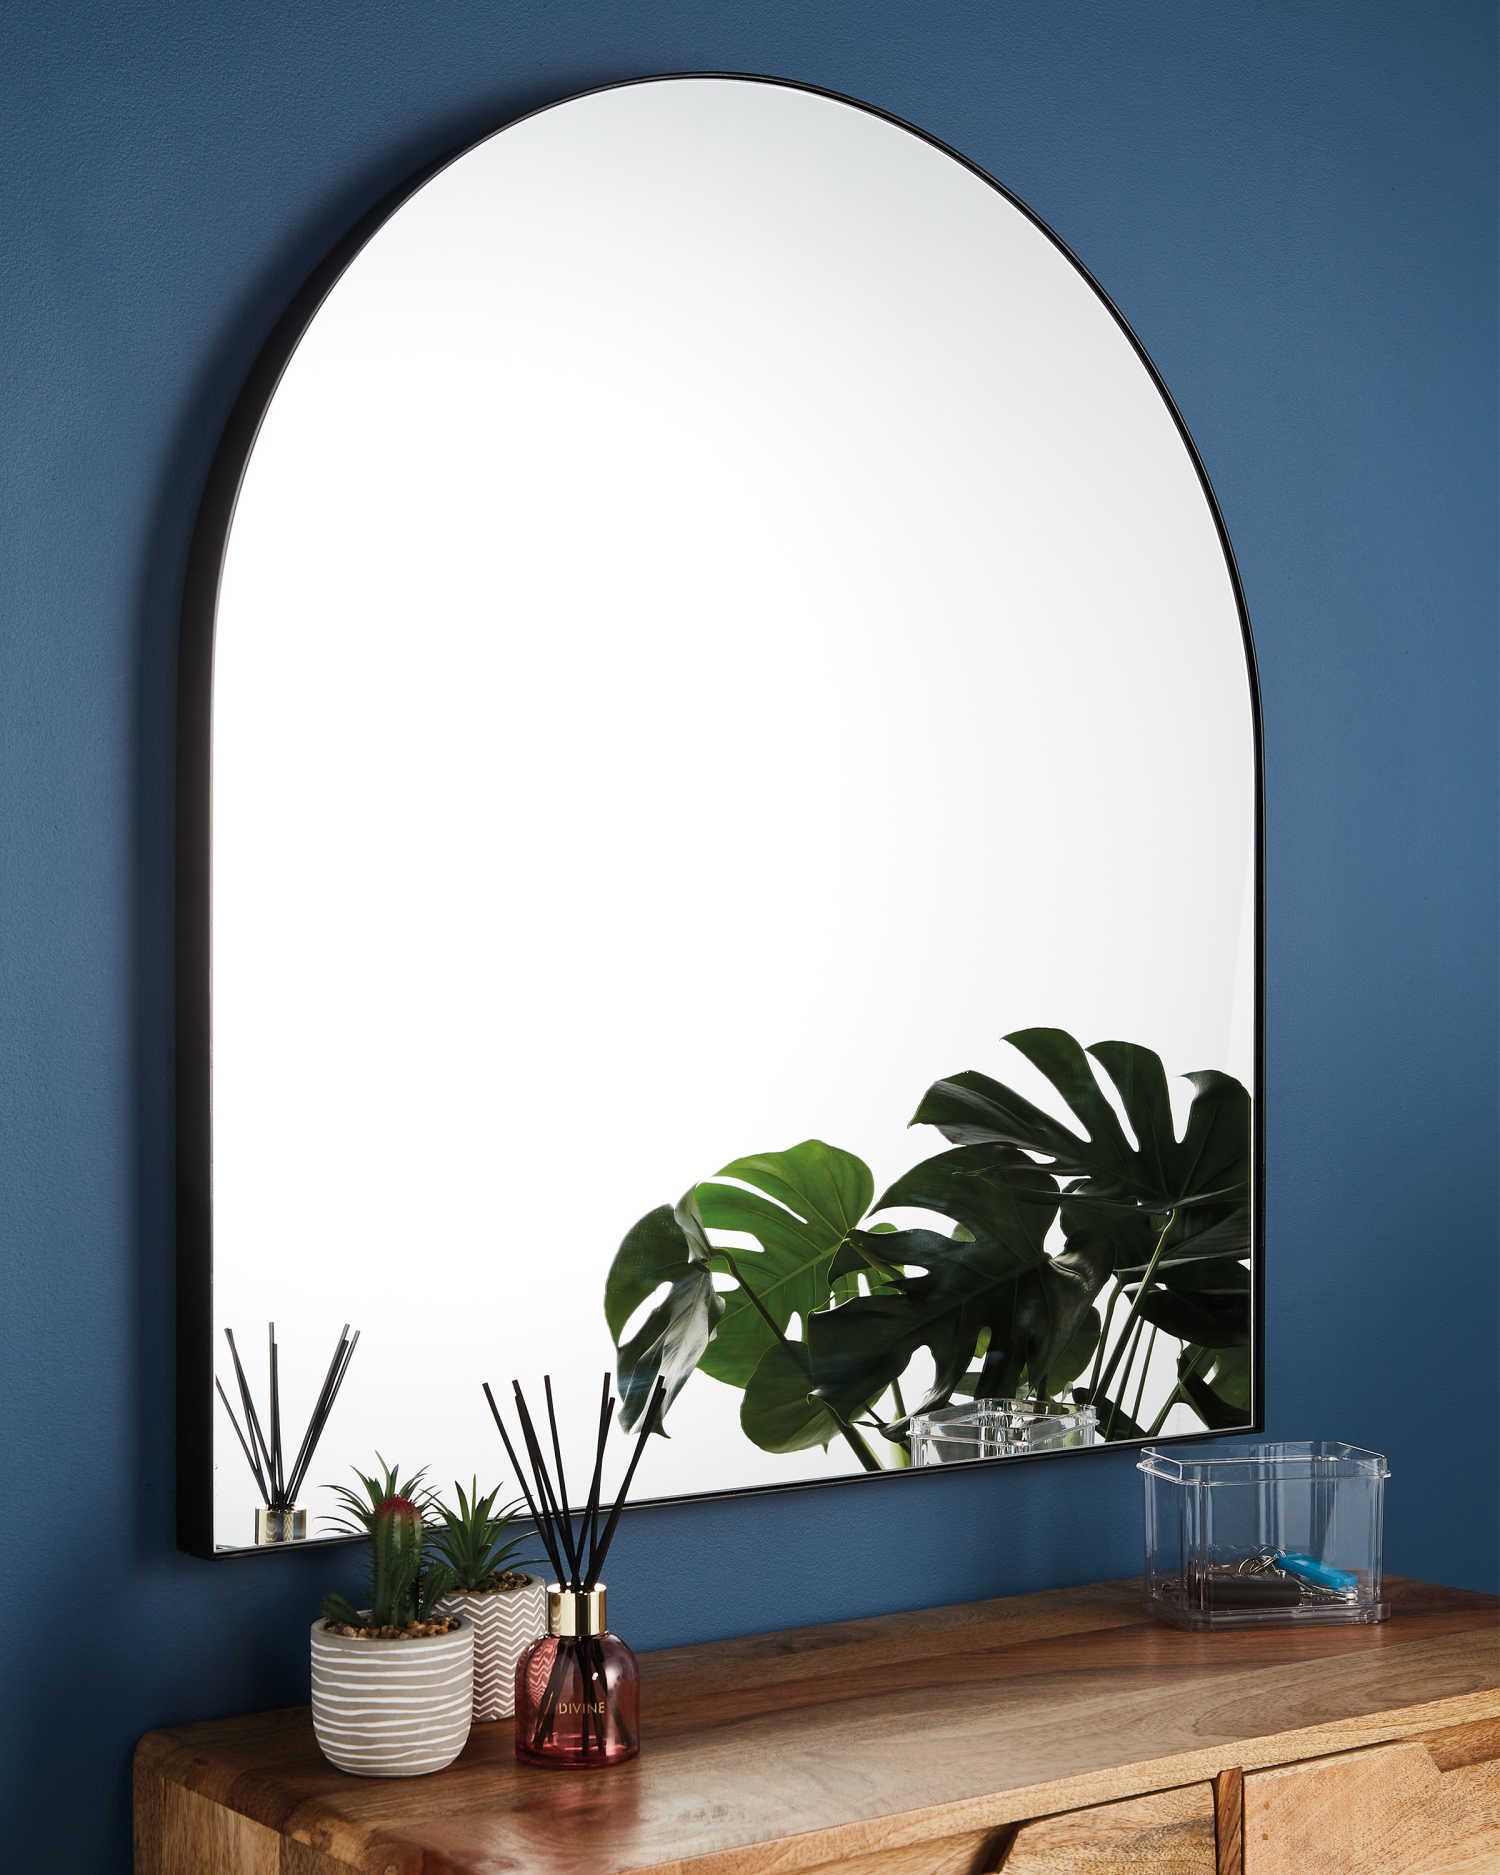 Aldi launches £35 arch mirror that's identical to one from Dunelm